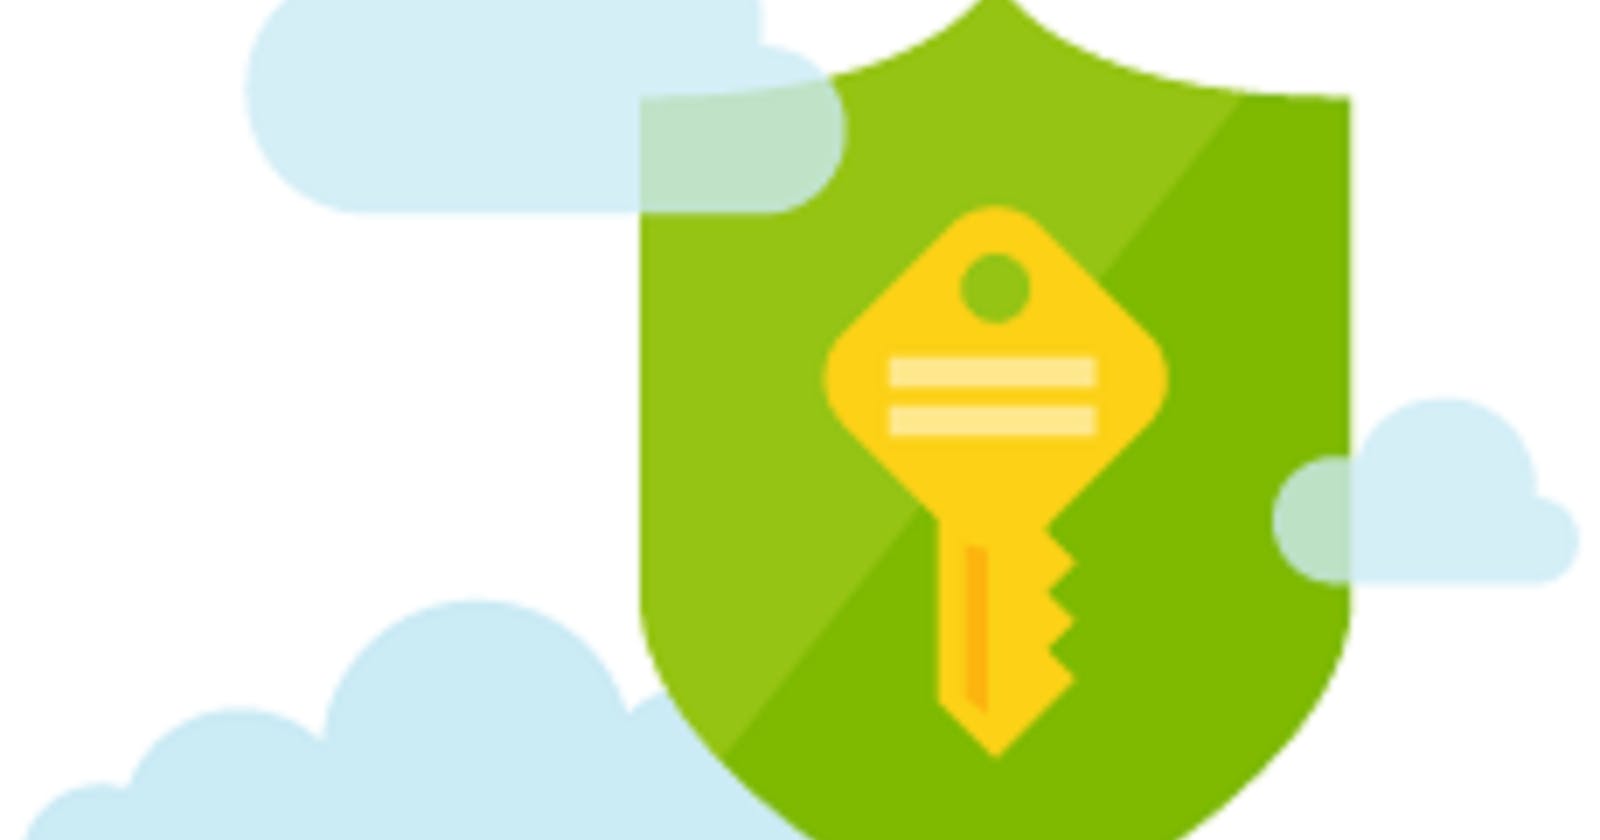 How to Implement Azure Key Vault and Add a Secret to the Azure Key Vault